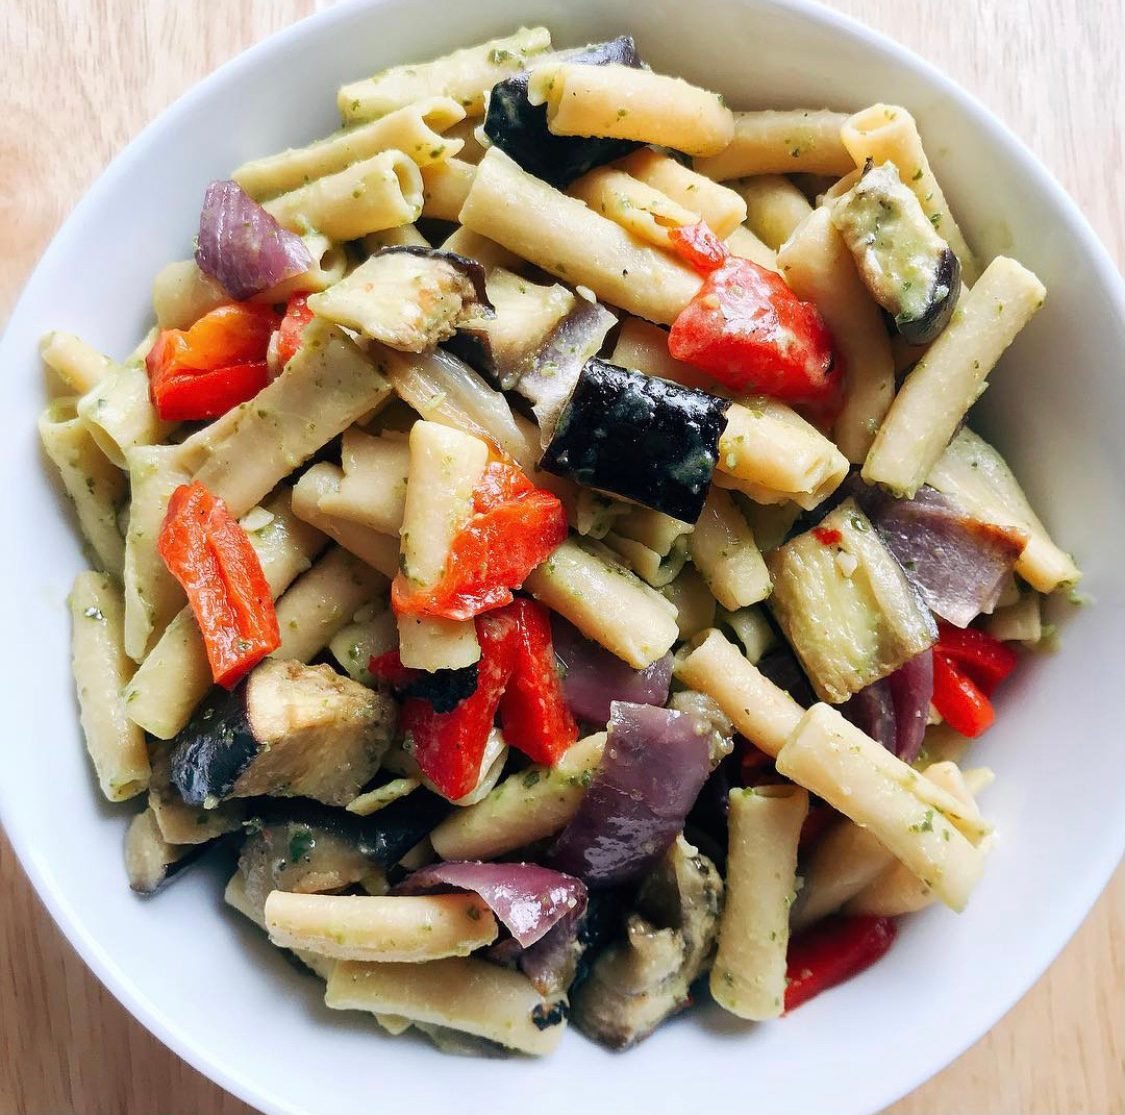 The Healthy Pasta Recipe this Nutritionist Loves